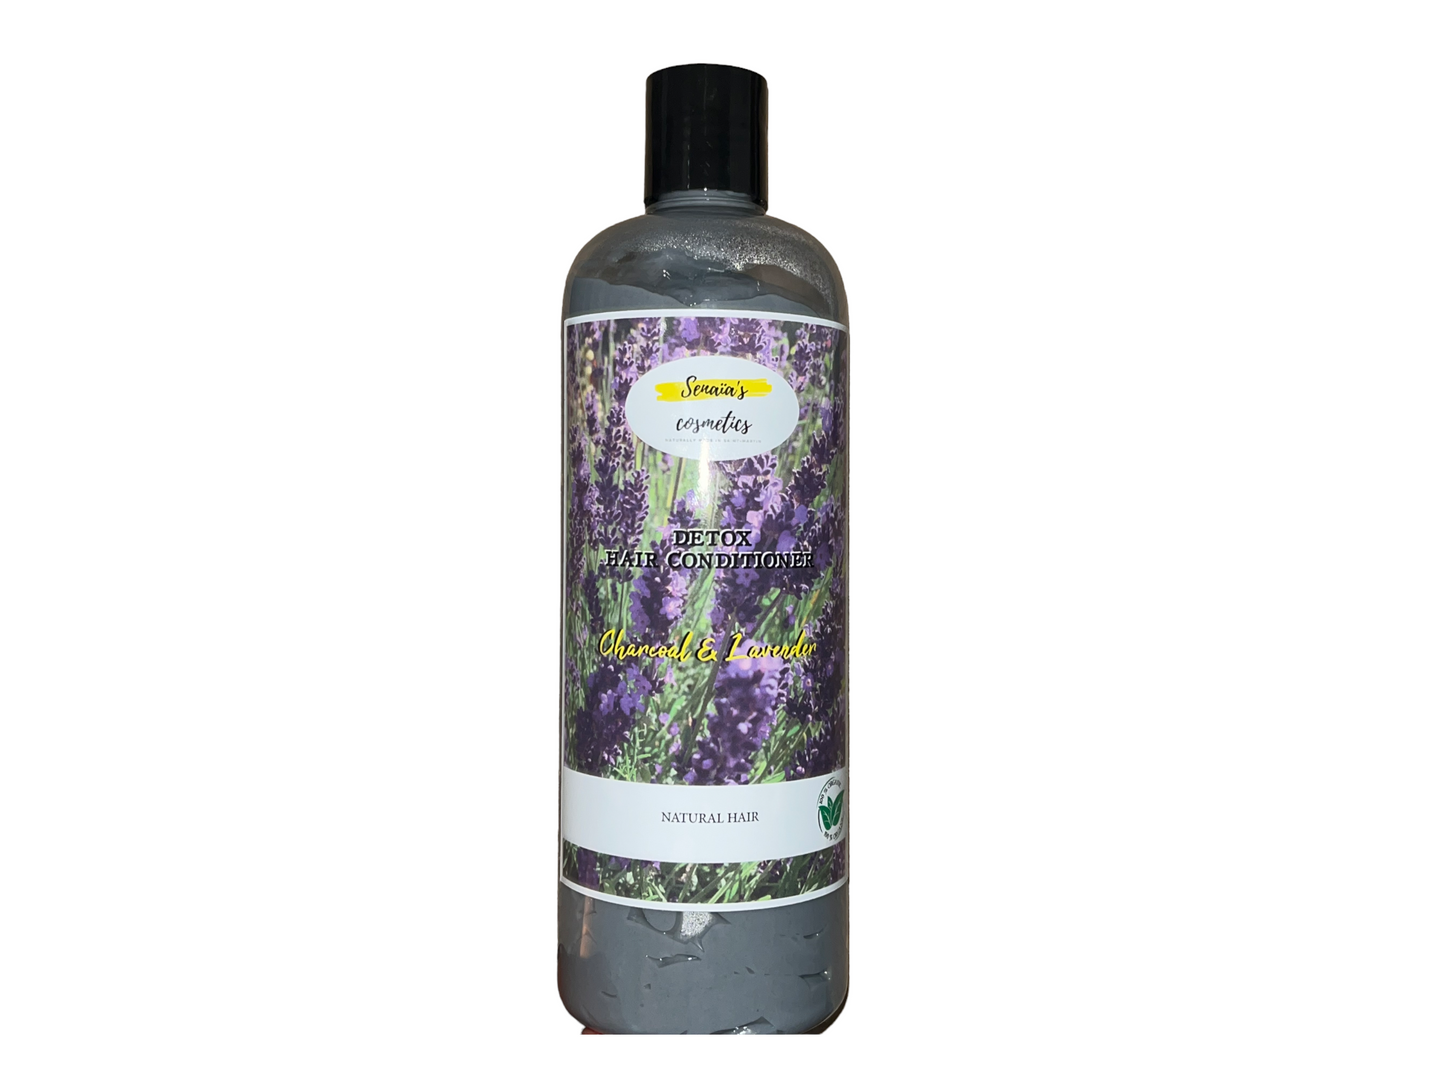 Lavender and charcoal detox conditioner